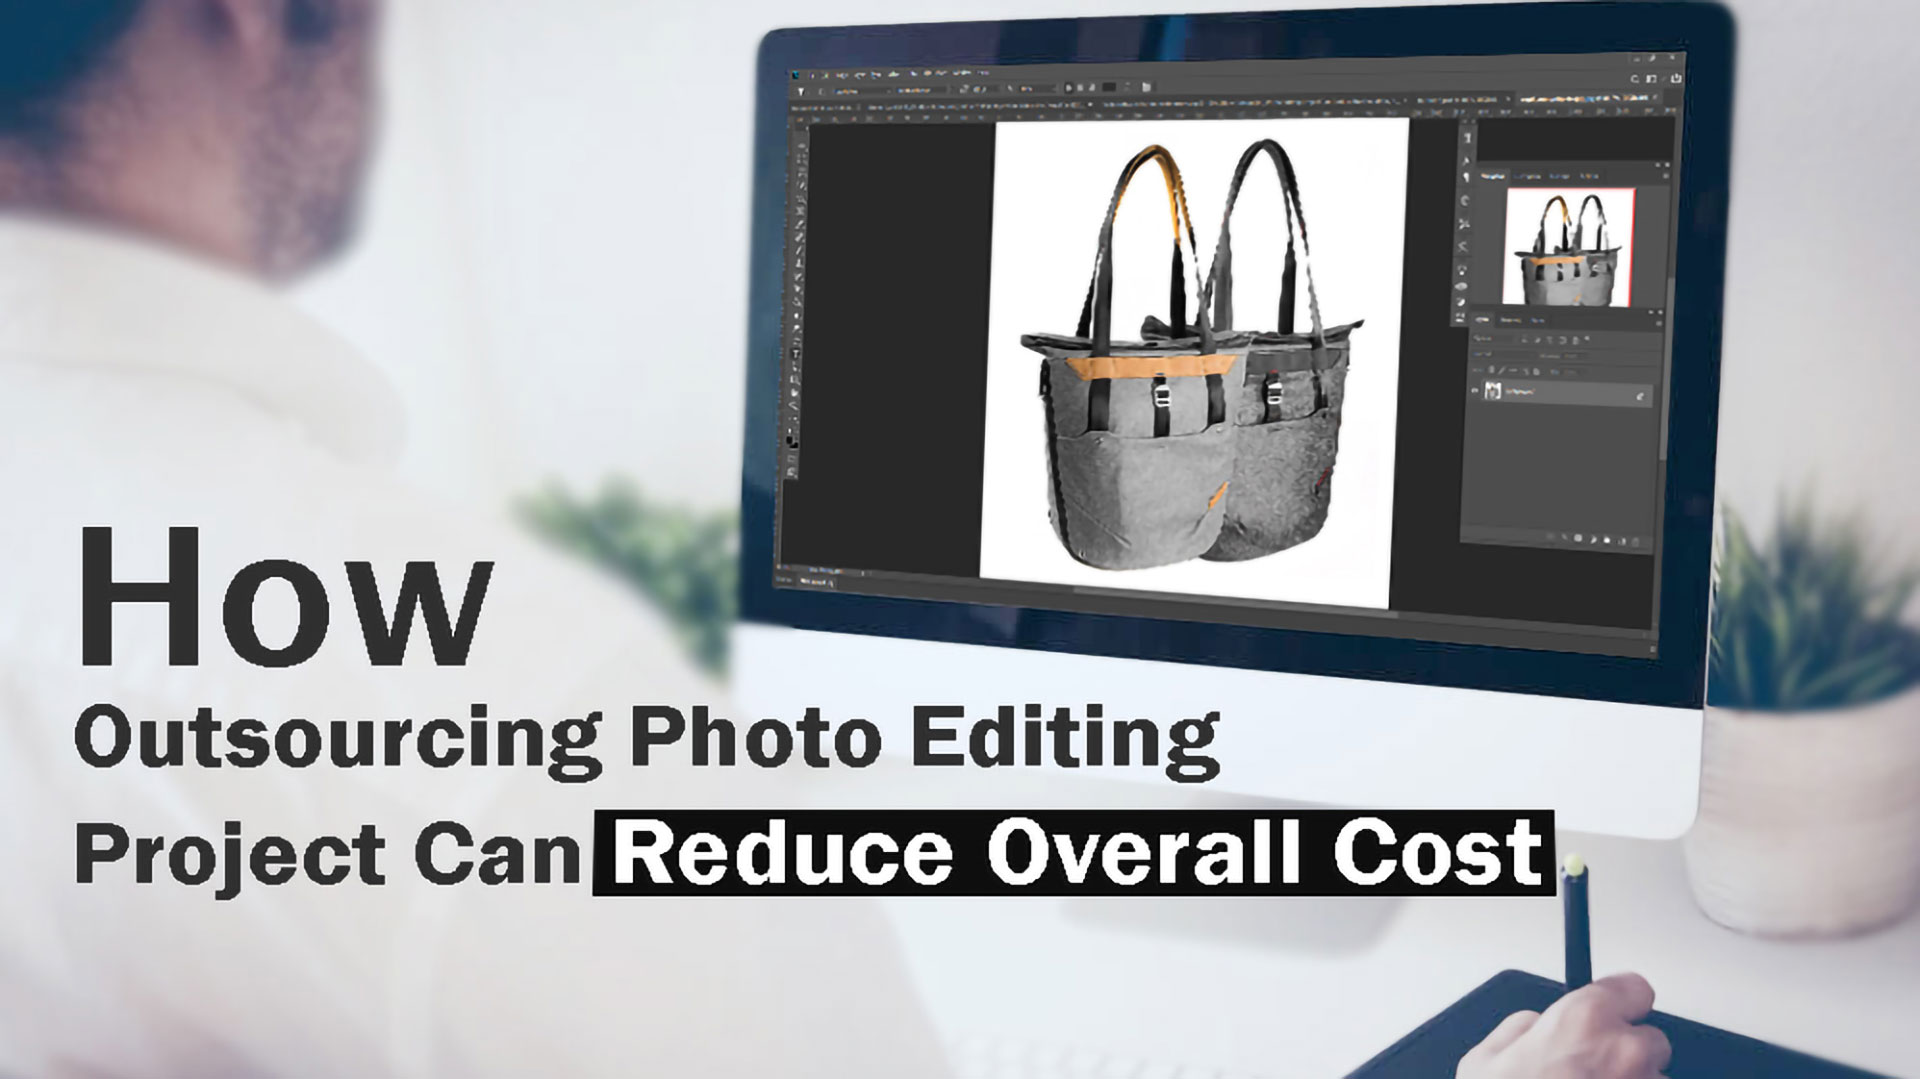 Outsourcing Photo Editing Services